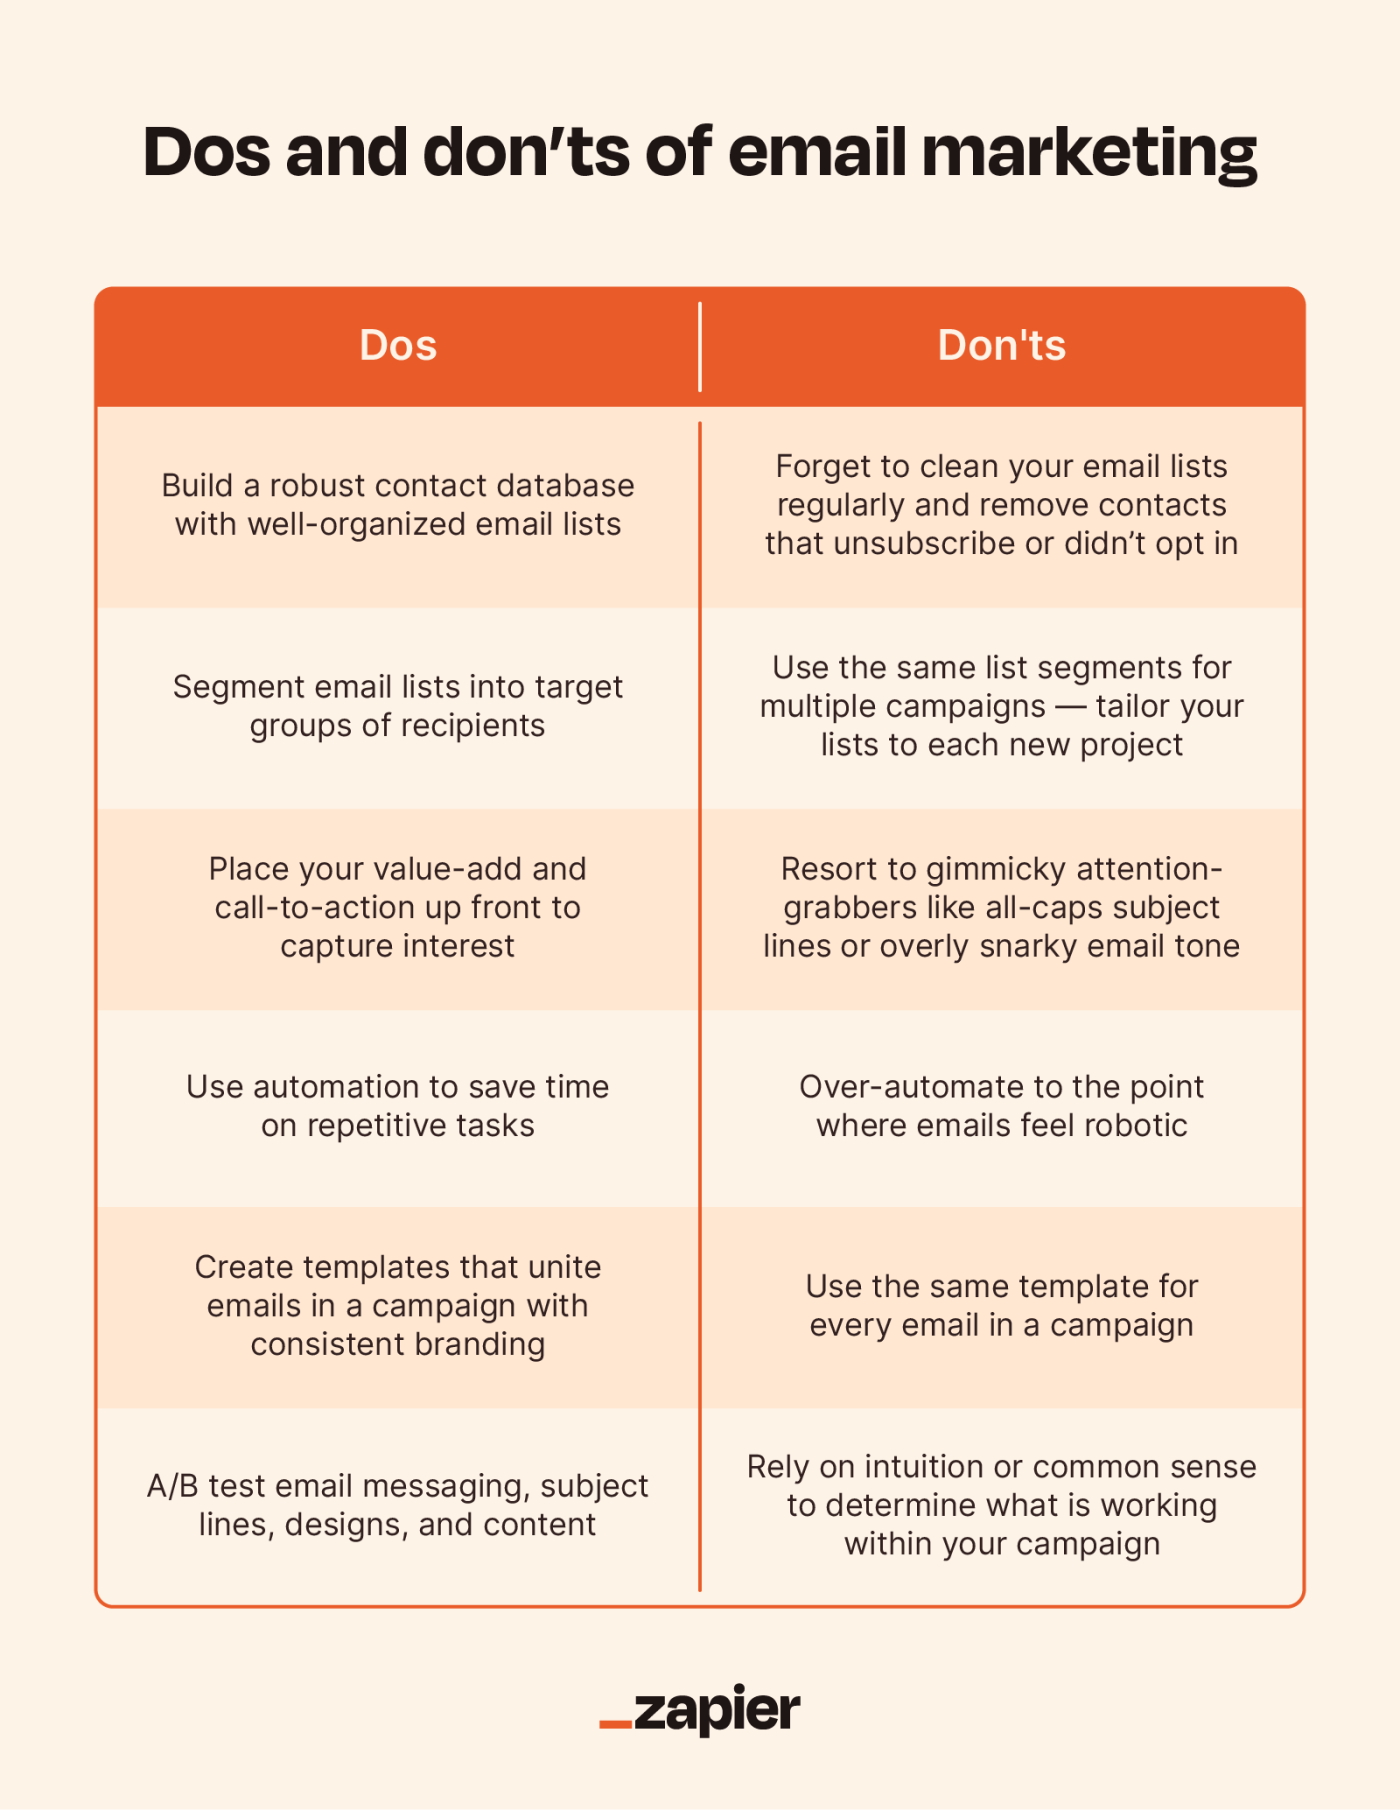 A chart with an orange background with dos and don'ts of marketing